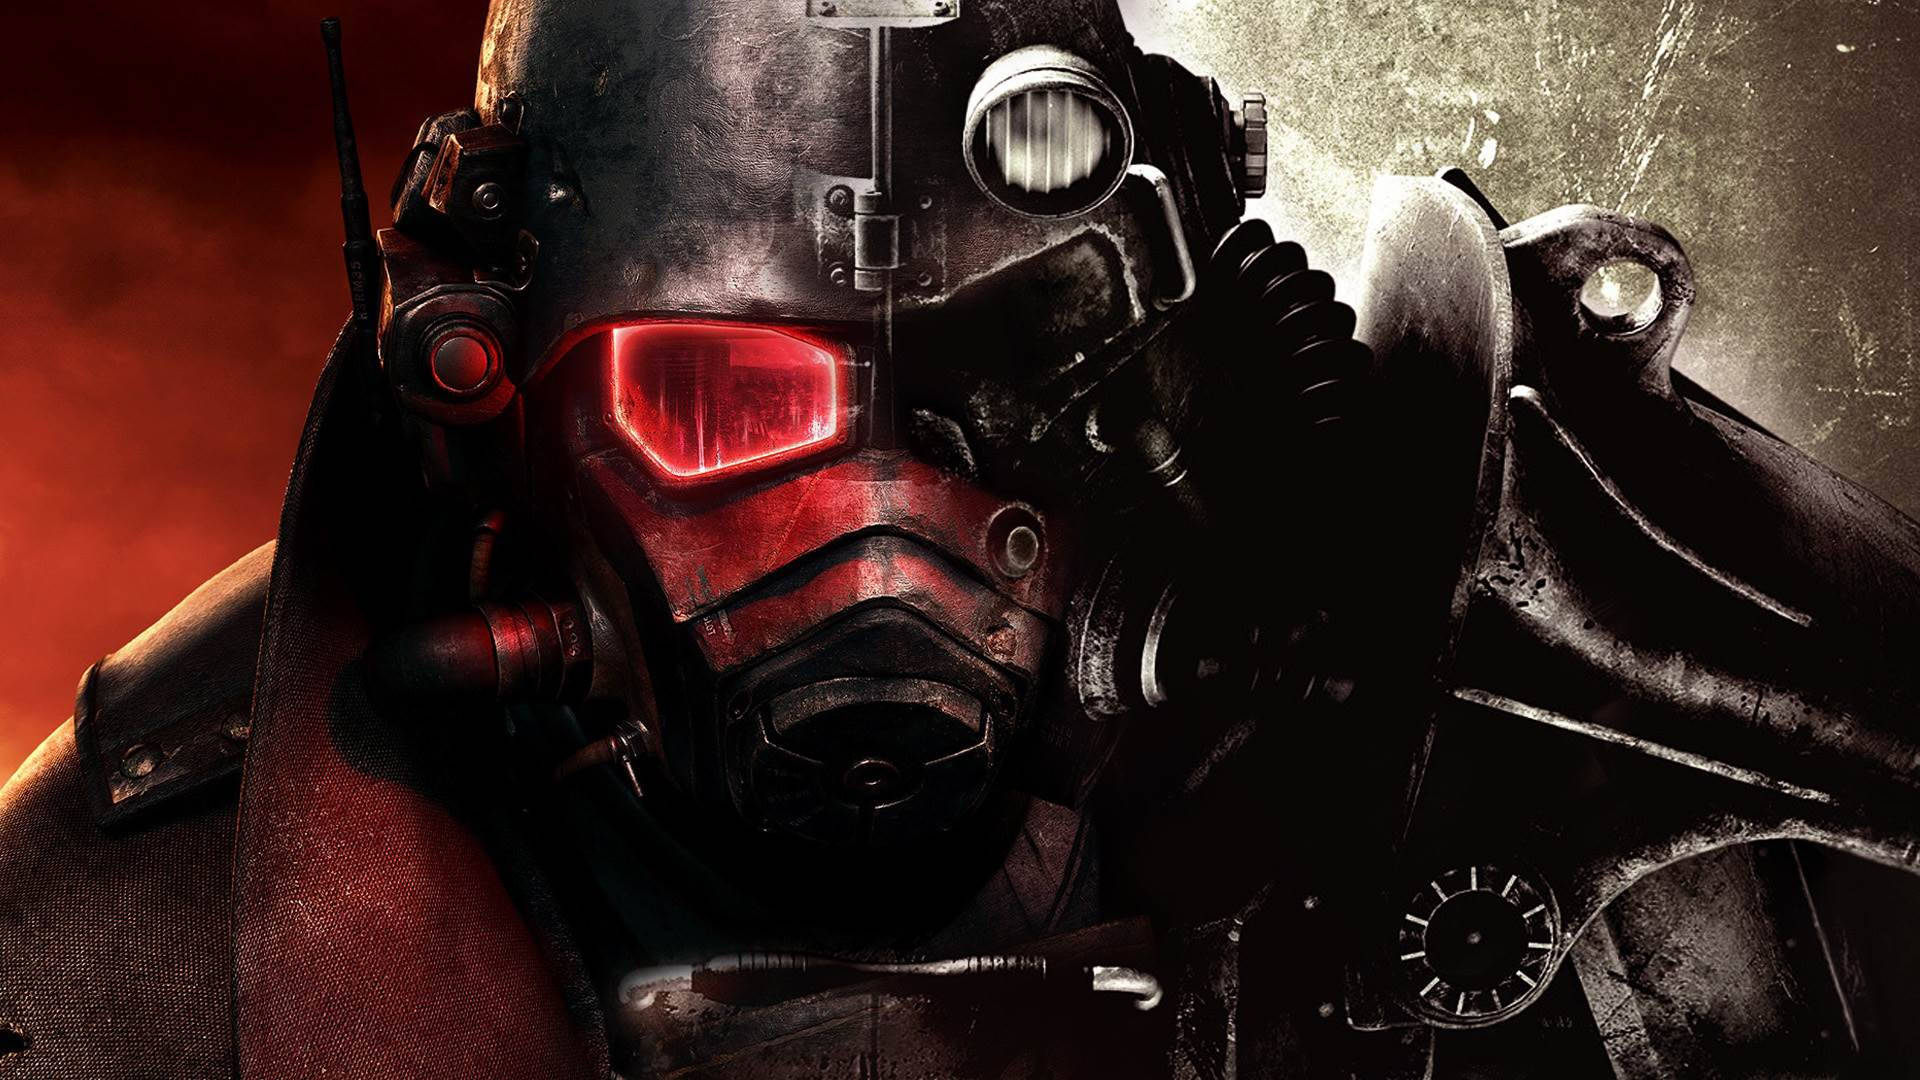 Take the Journey Into the Wasteland in Fallout New Vegas Wallpaper